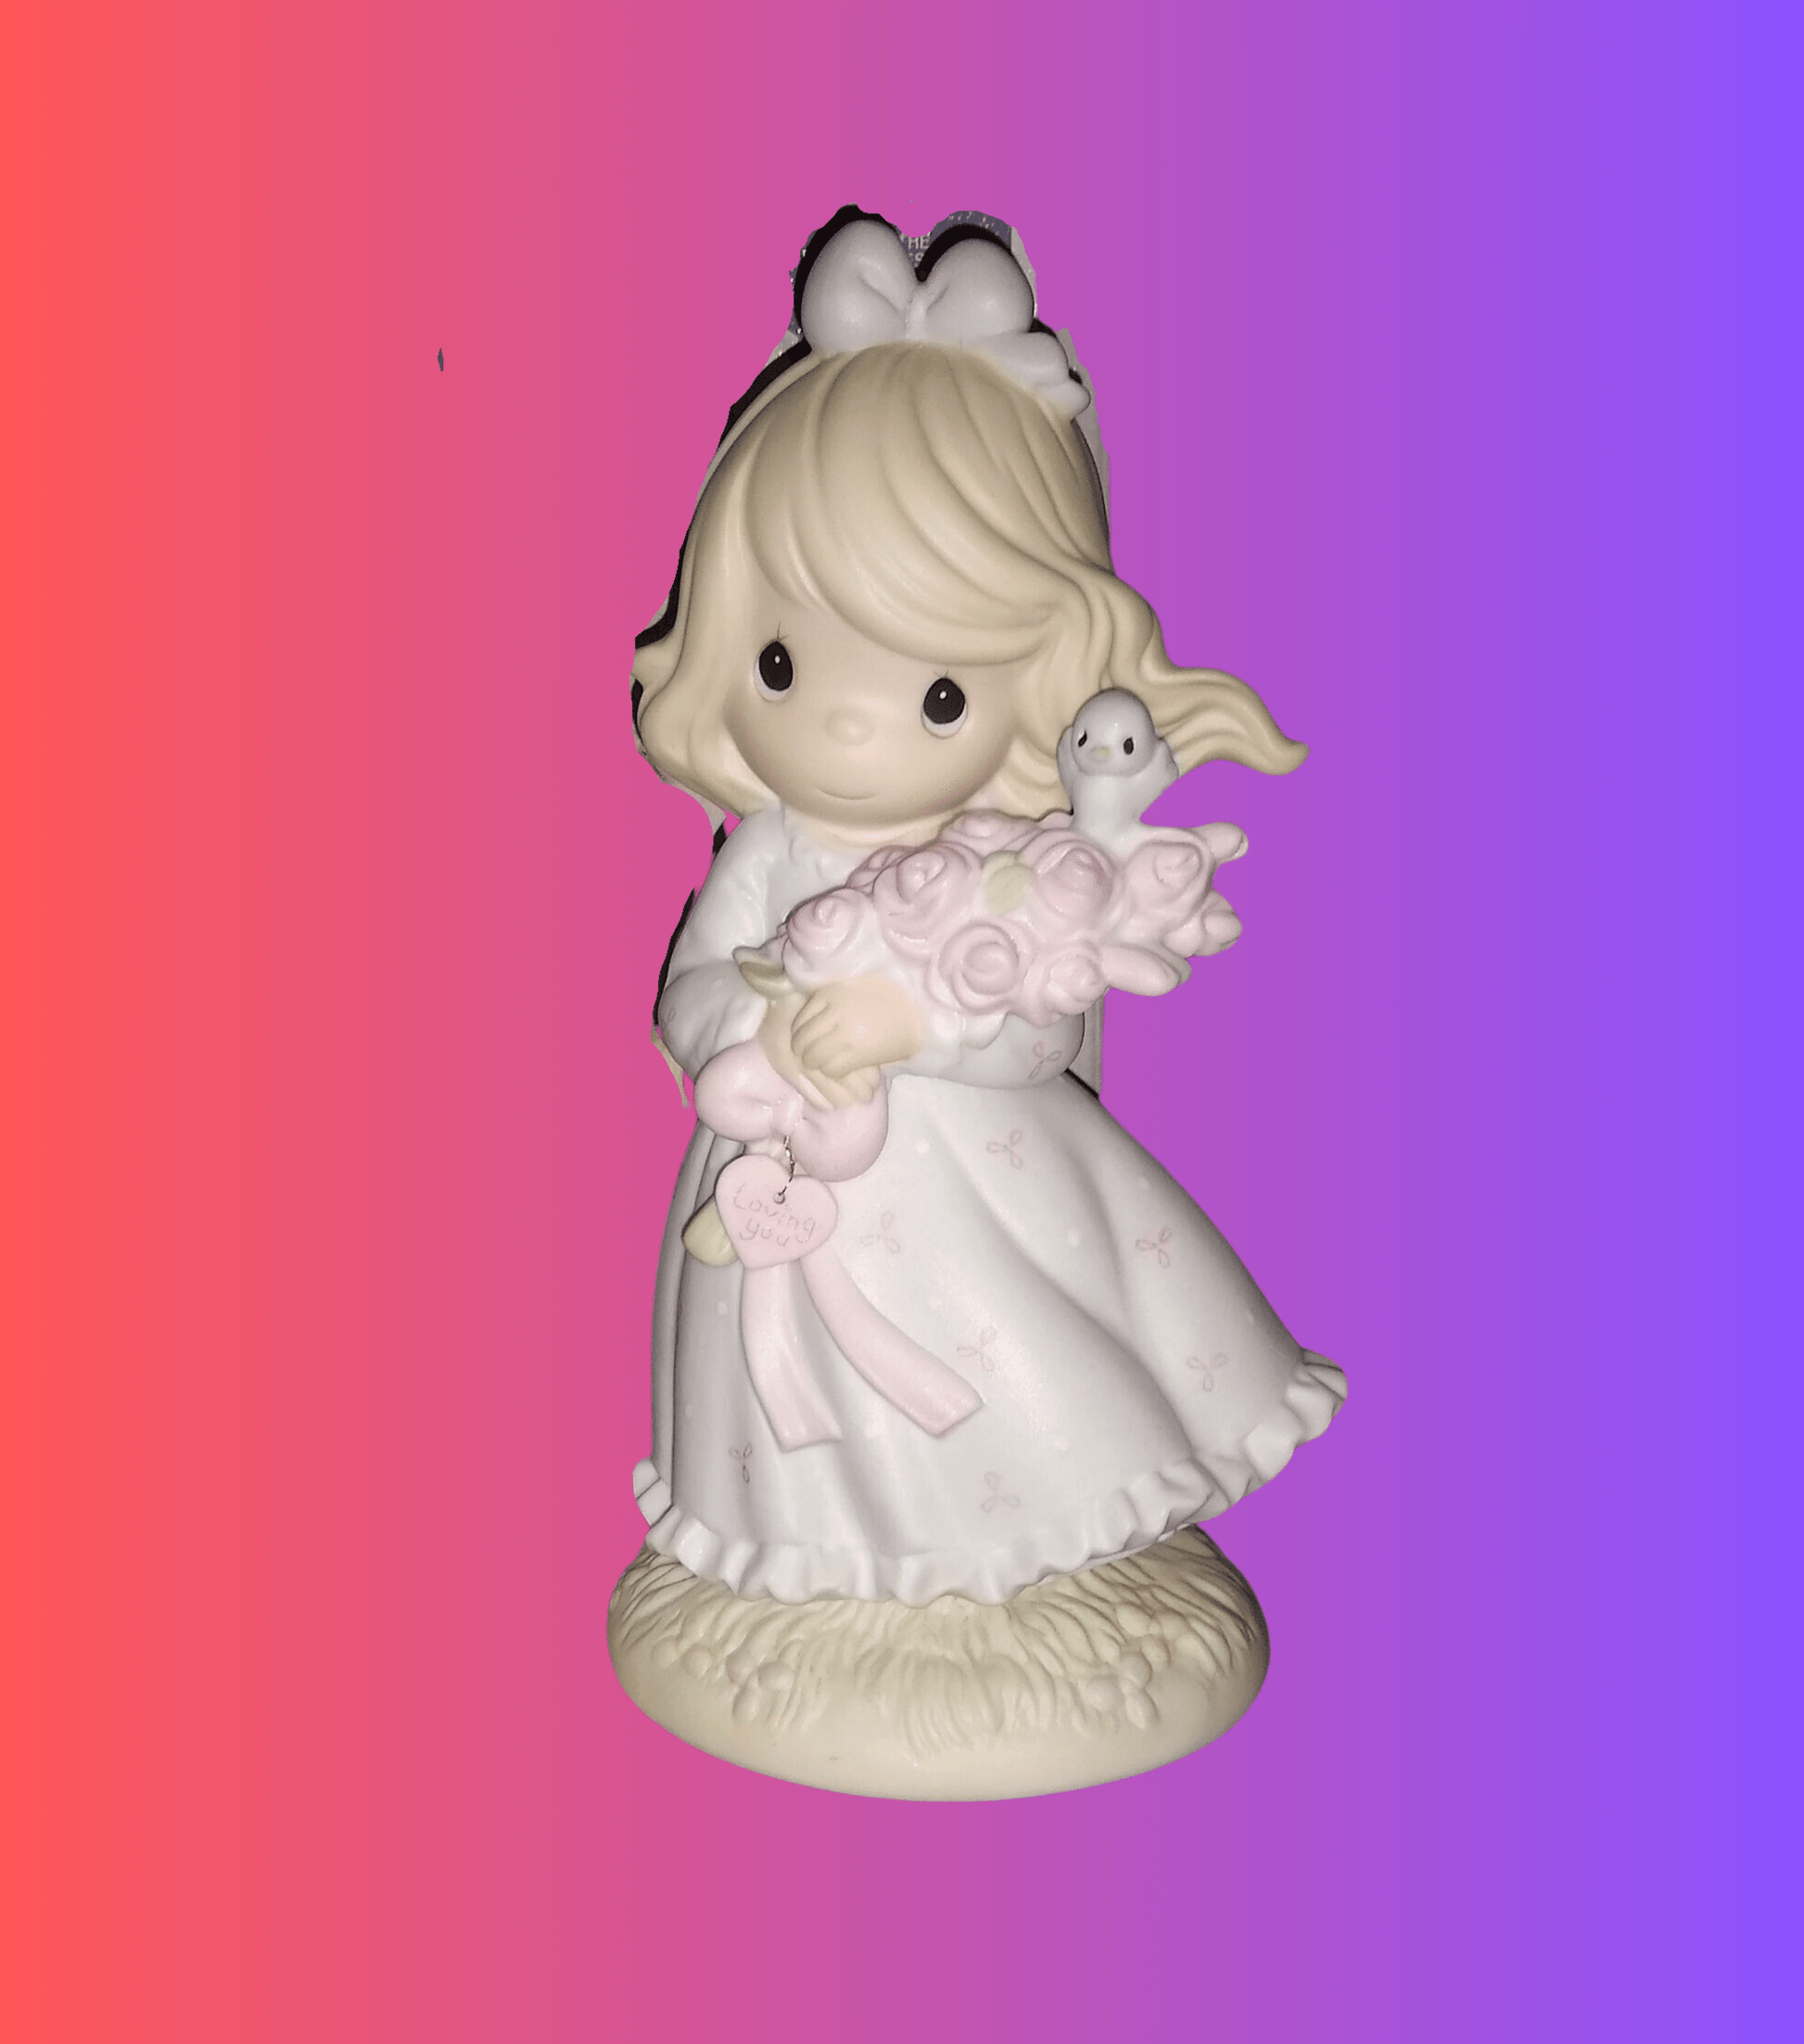  Vintage Precious Moments Figurine of A Girl Holding Roses With A Blue Bird Sitting On The Top Flower. You Are My Happiness By Enesco 1991, Last Forever collection.  